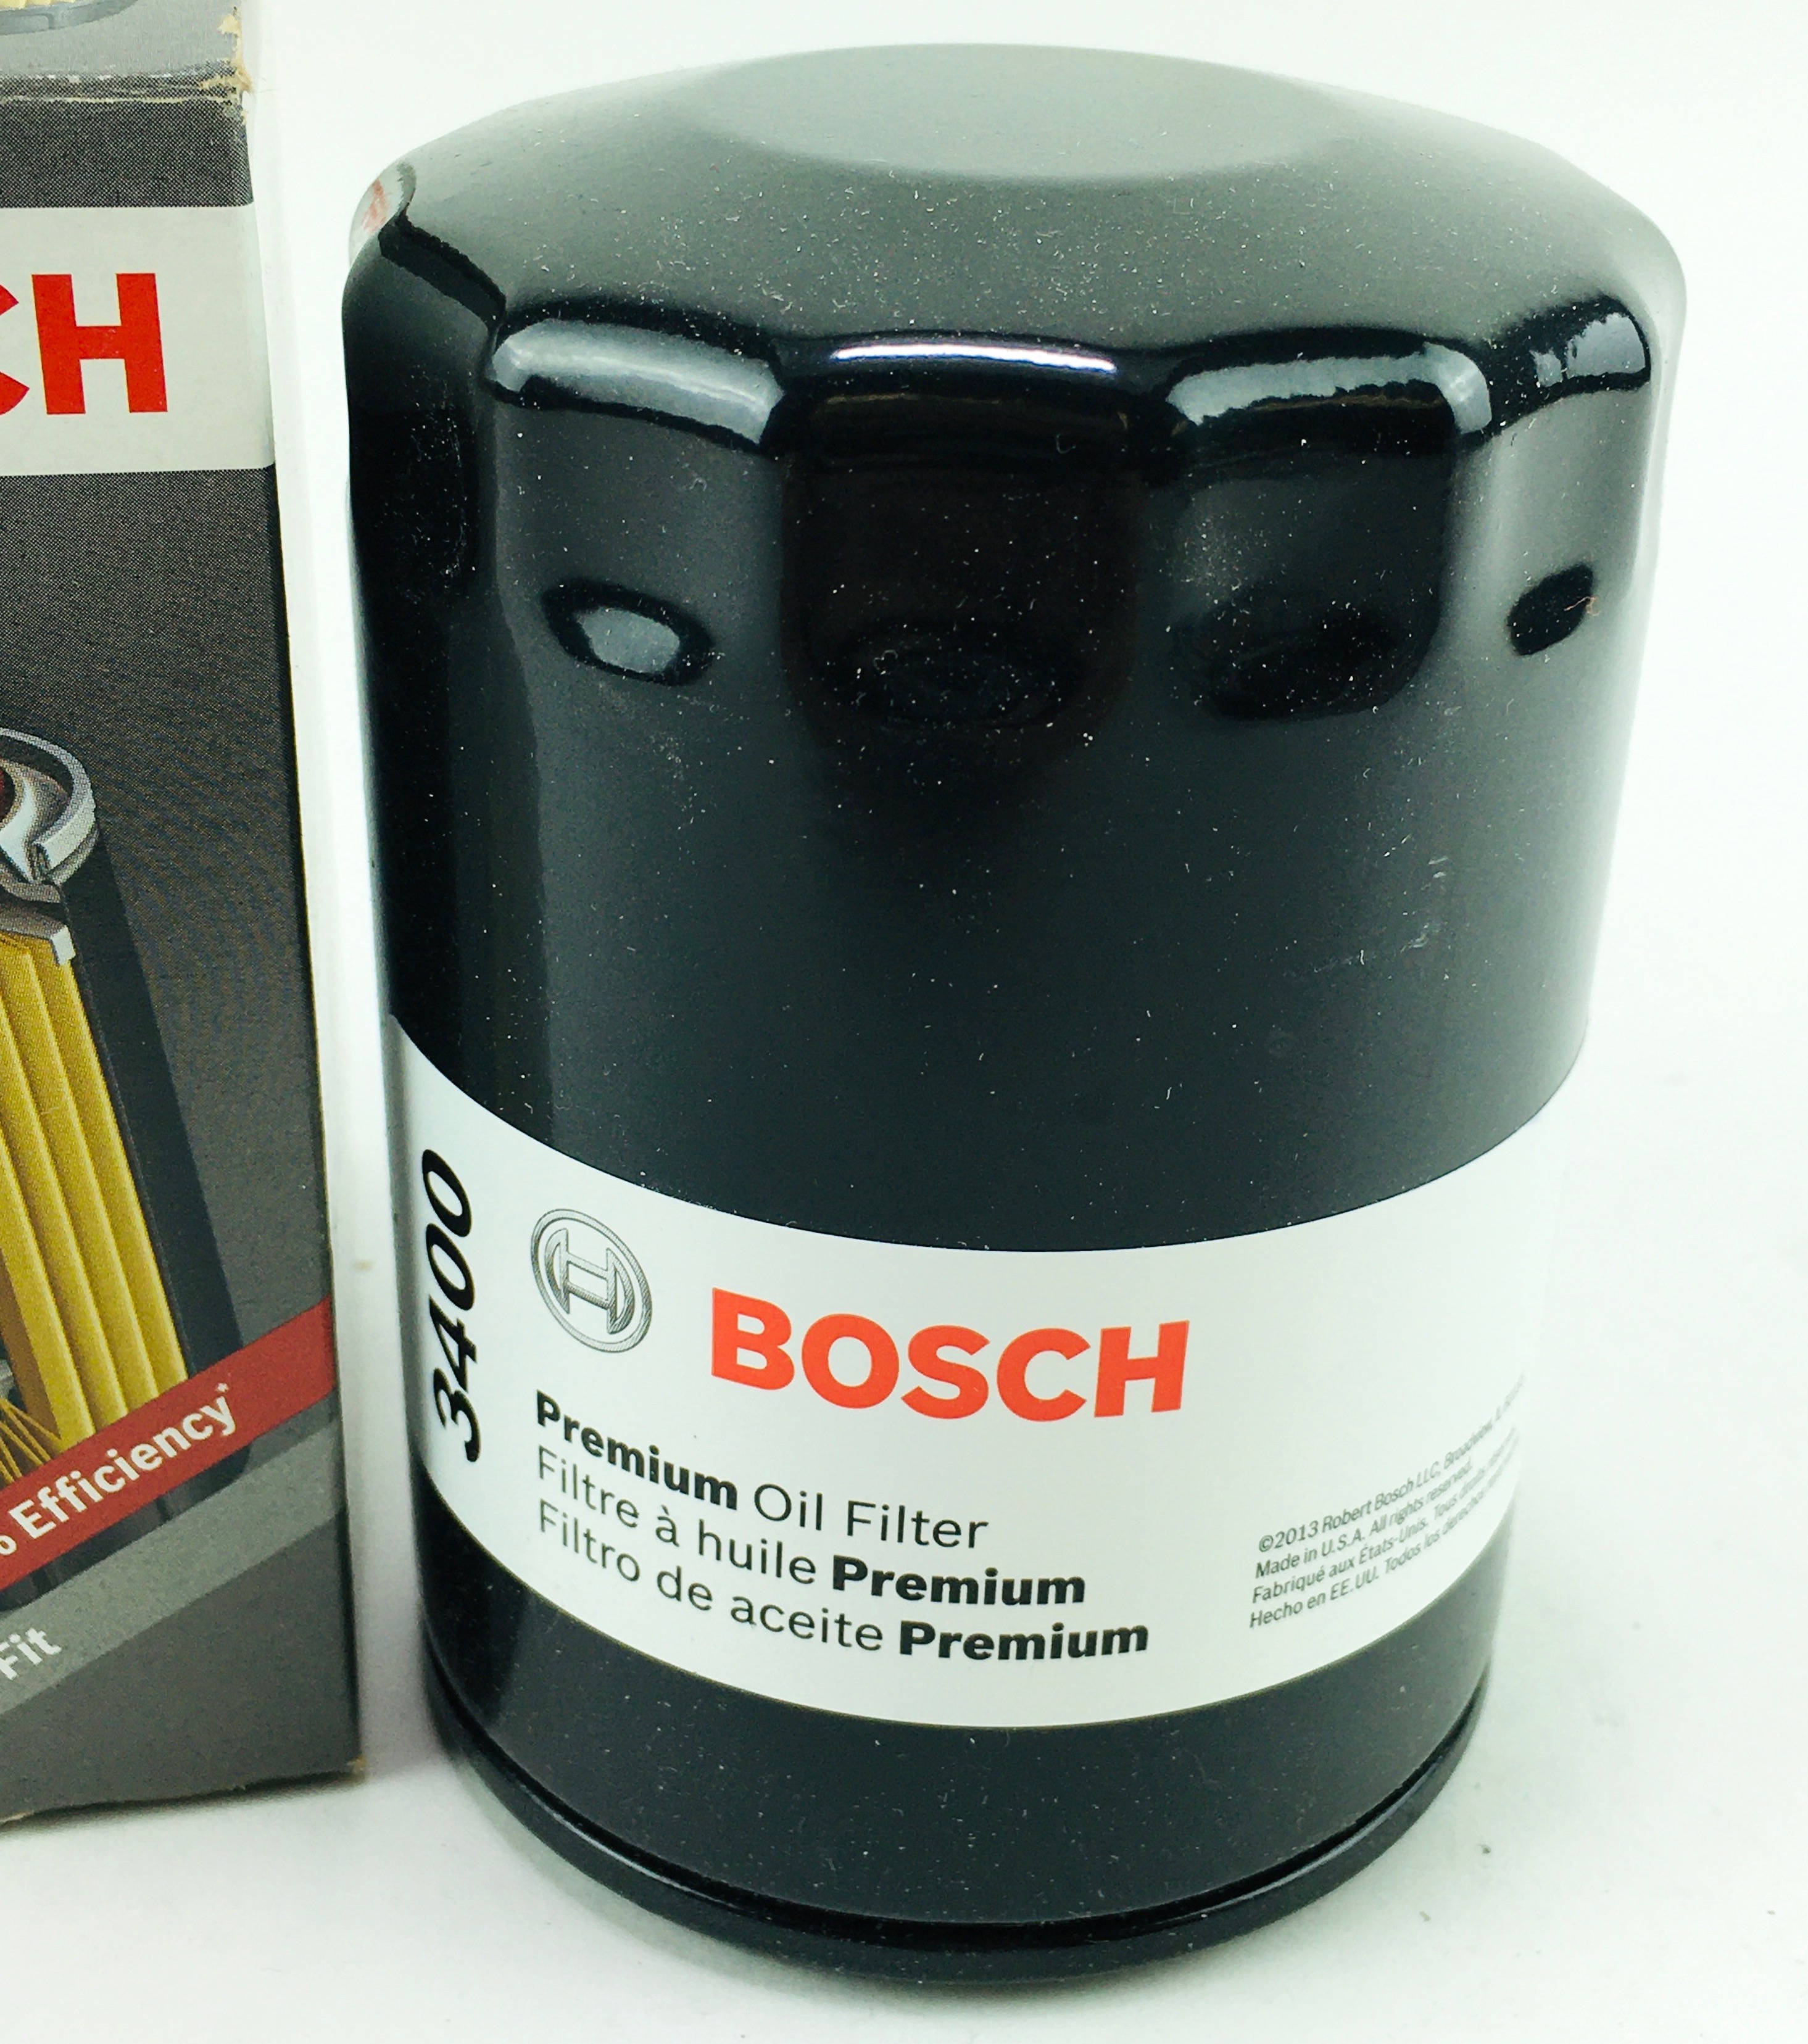 Lot of 6 New Genuine Bosch 3400 Premium Spin-On Engine Oil Filters Free Shipping - image 6